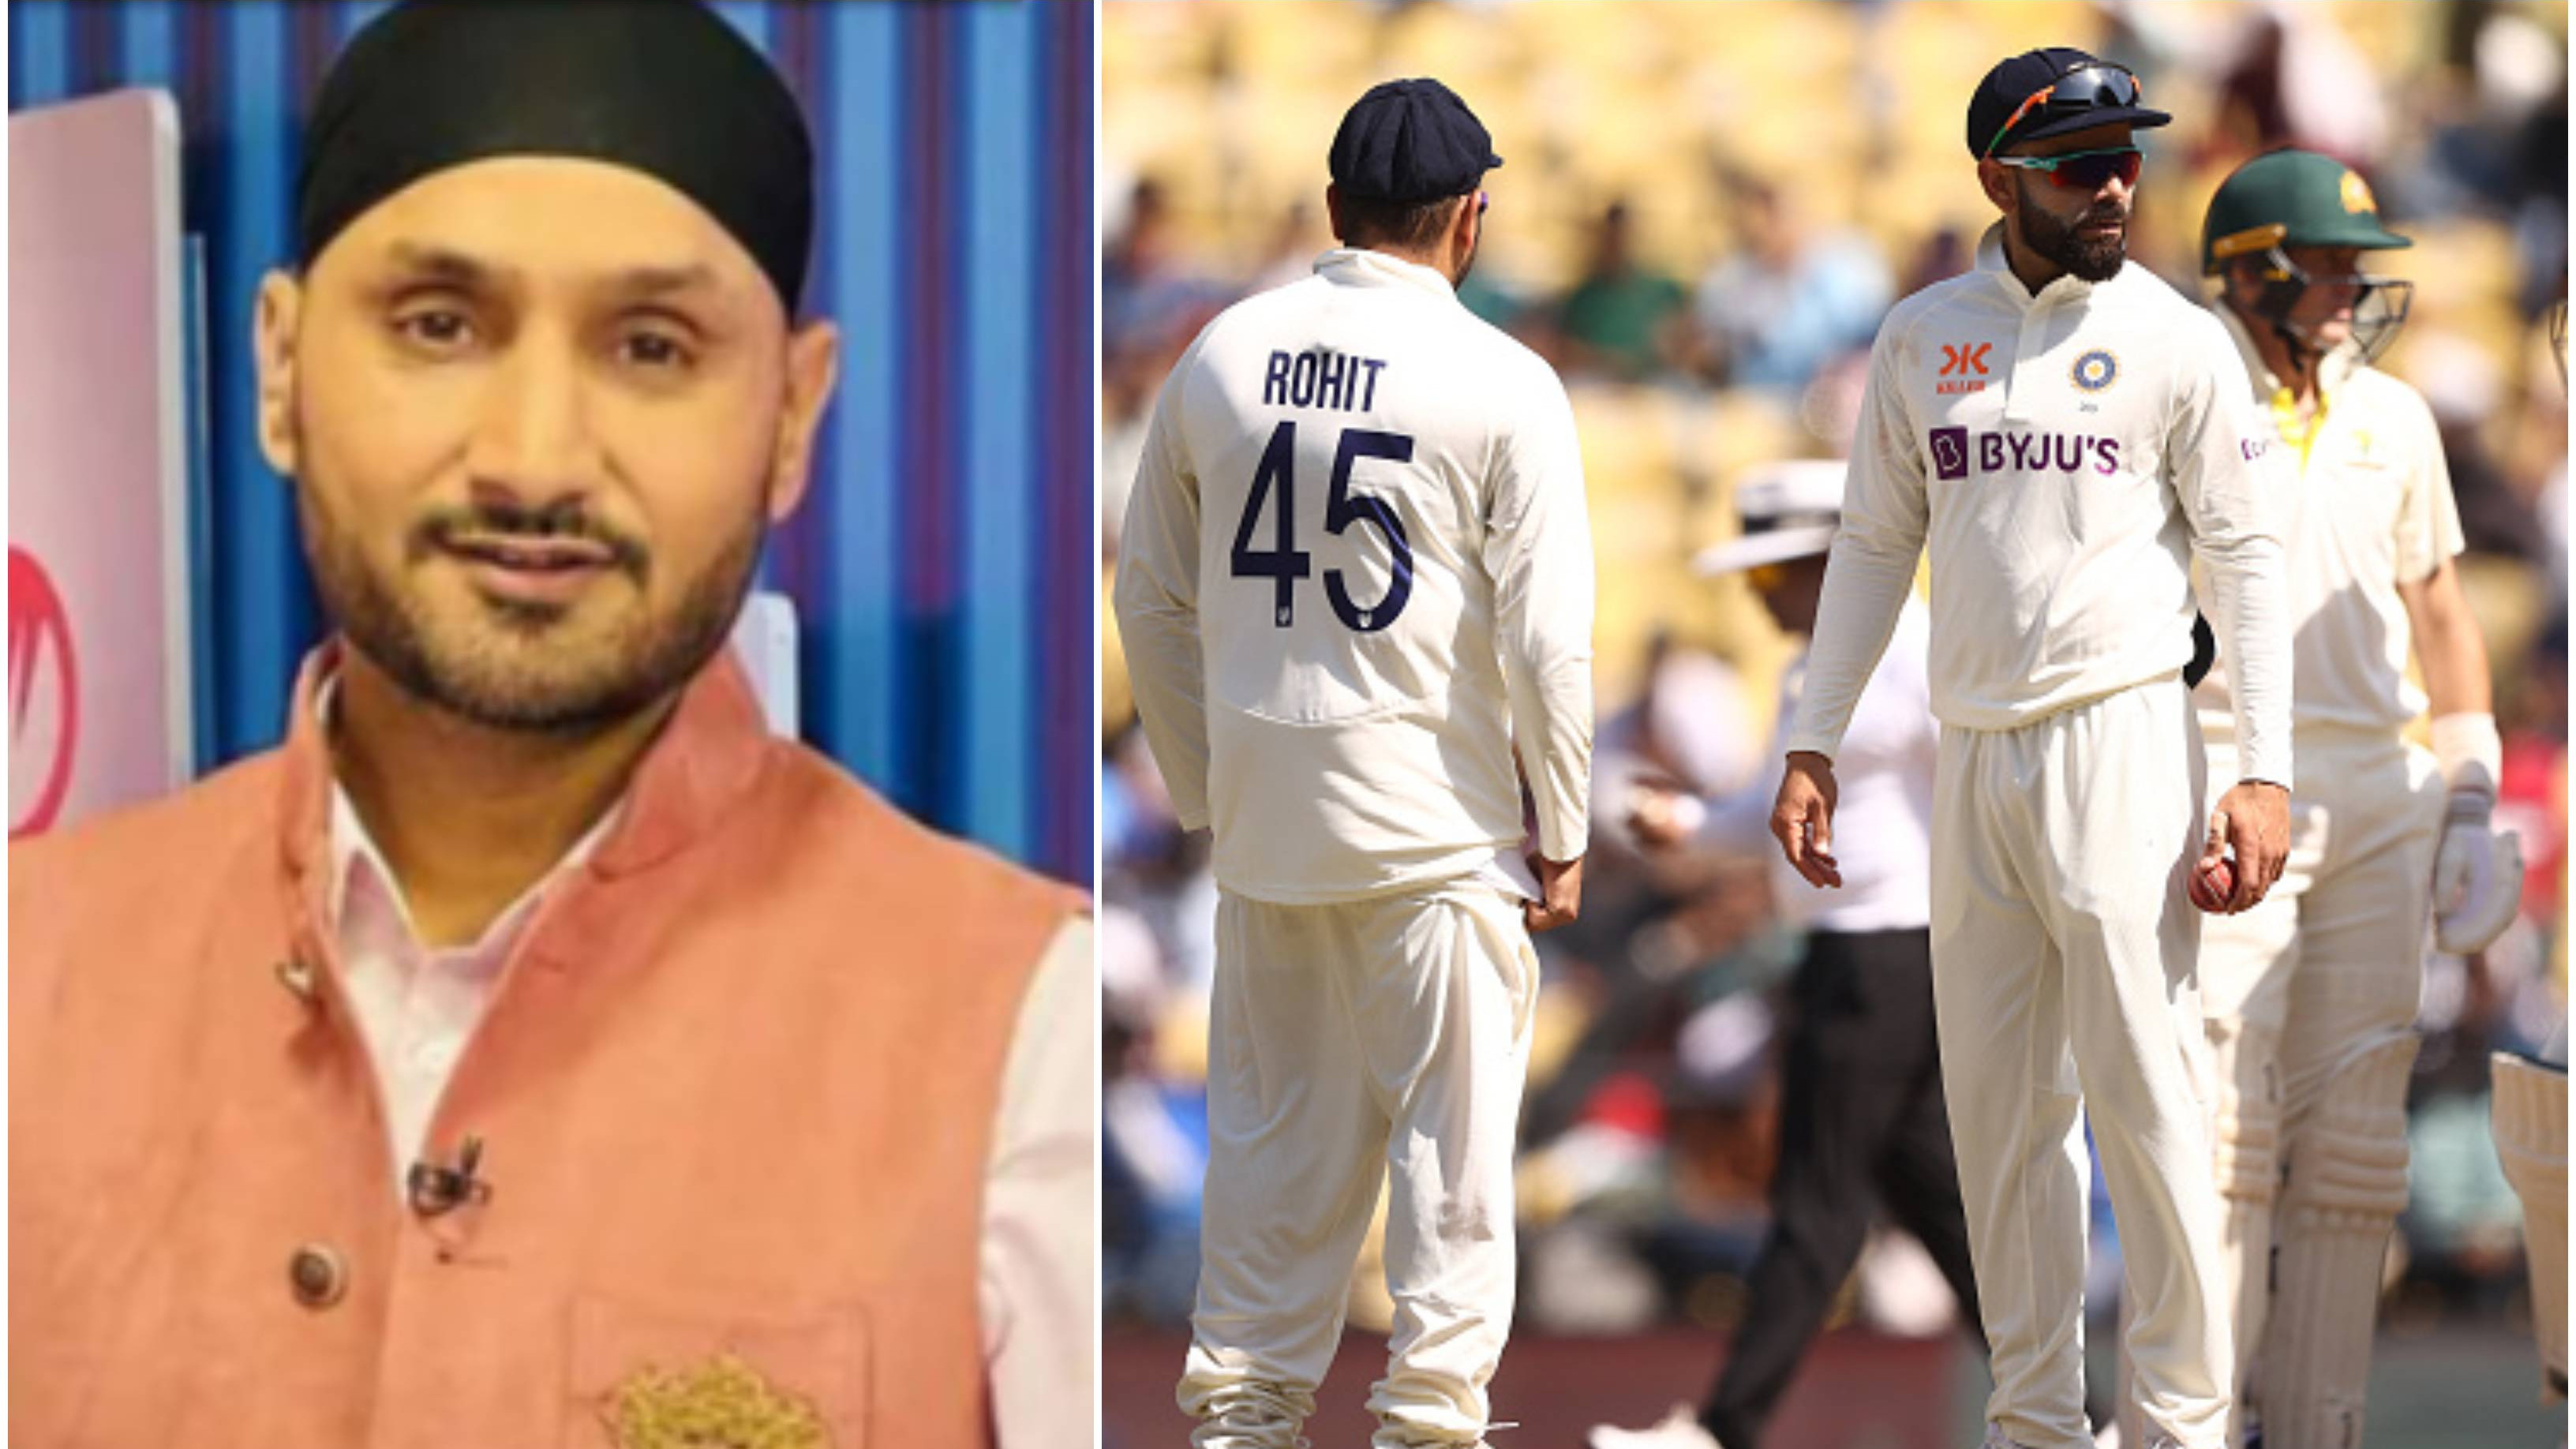 “Not a step in the right direction,” Harbhajan Singh opposes the idea to reinstate Virat Kohli as Test captain